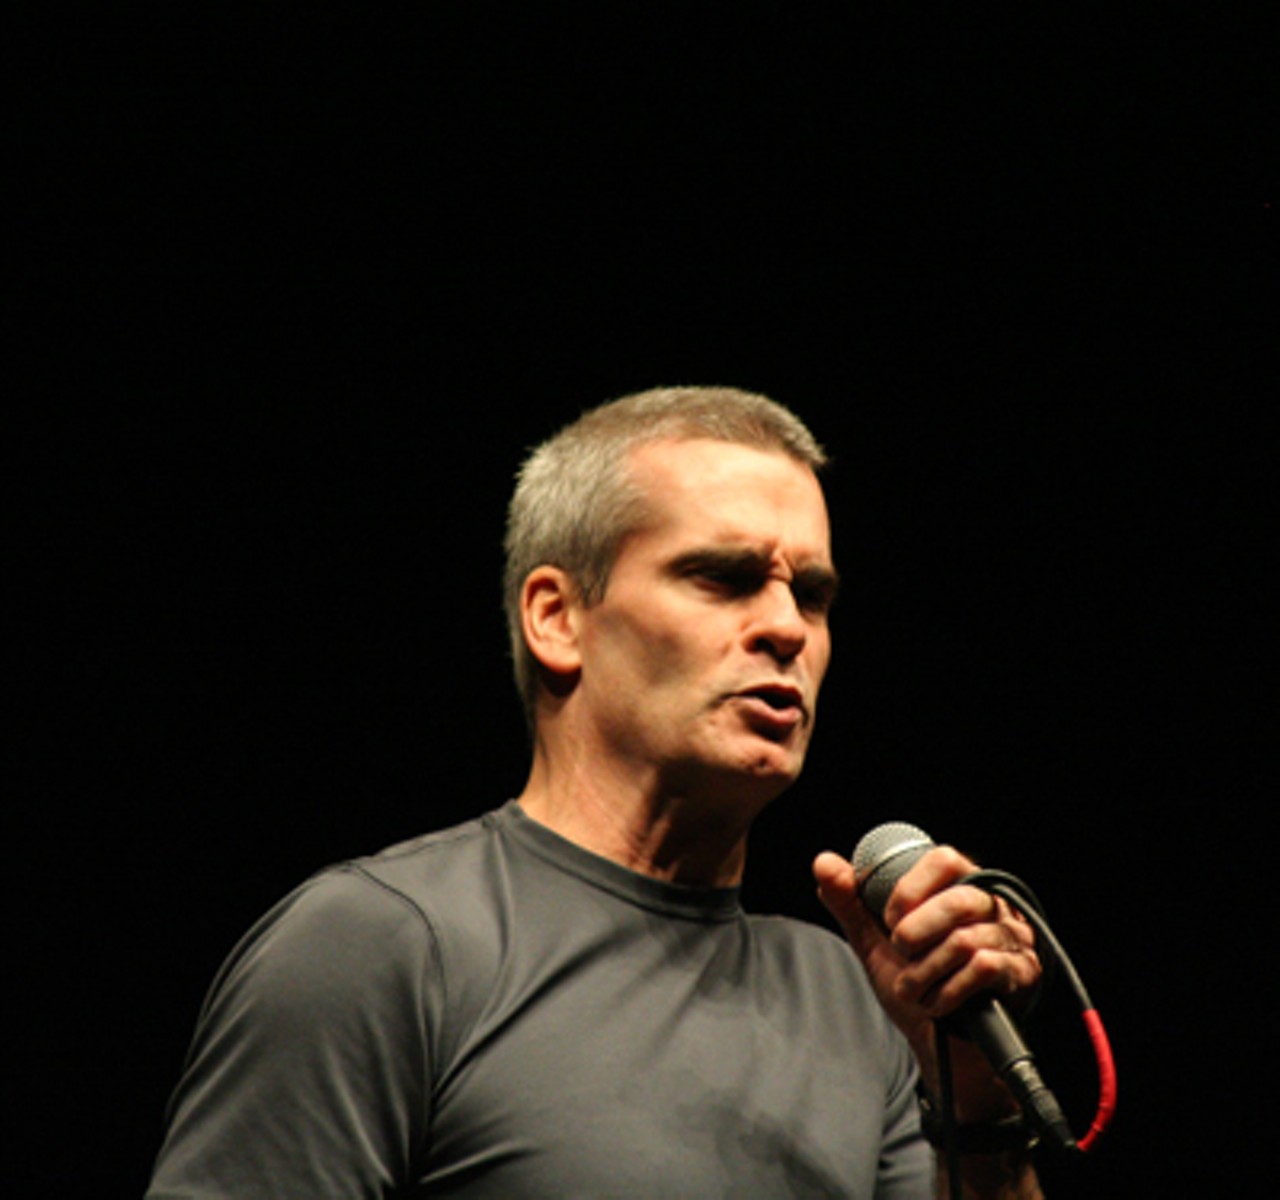 Angry Rollins. 
Read a recap of Rollins' spoken word performance in A to Z.
Read an interview with Rollins in this week's edition, "Get in the Van: Henry Rollins &mdash; musician, spoken-word artist, writer and punk legend &mdash; talks about life on the road.". 
We also posted outtakes from that interview in A to Z.